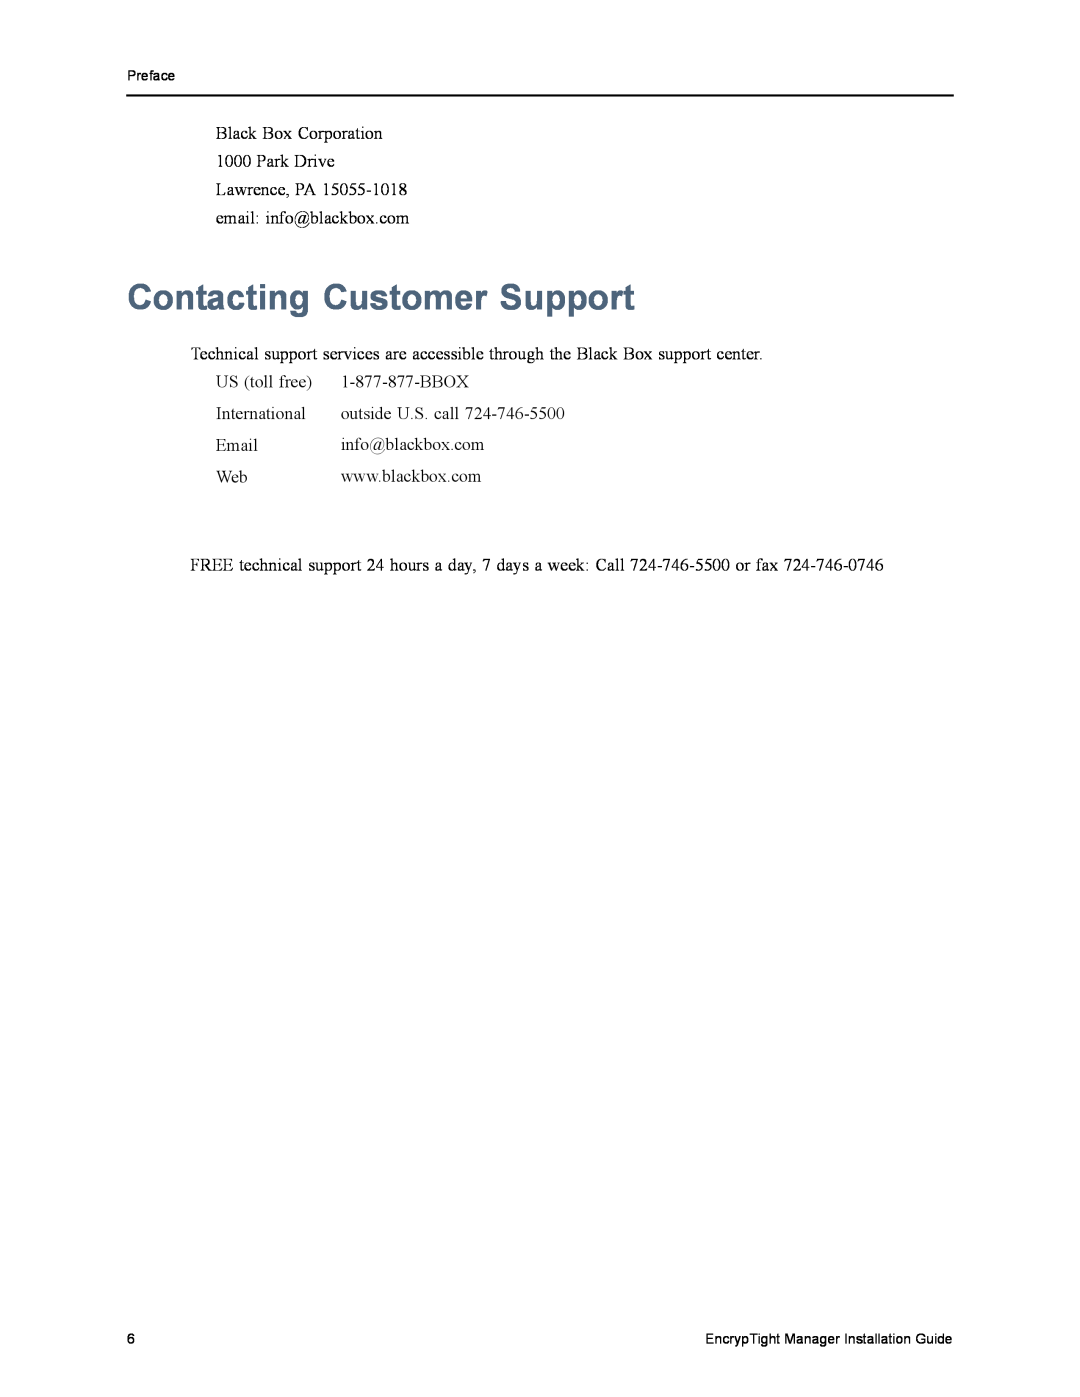 Black Box ET0010A, ET1000A, ET0100A, ET10000A, The EncrypTight manual Contacting Customer Support 